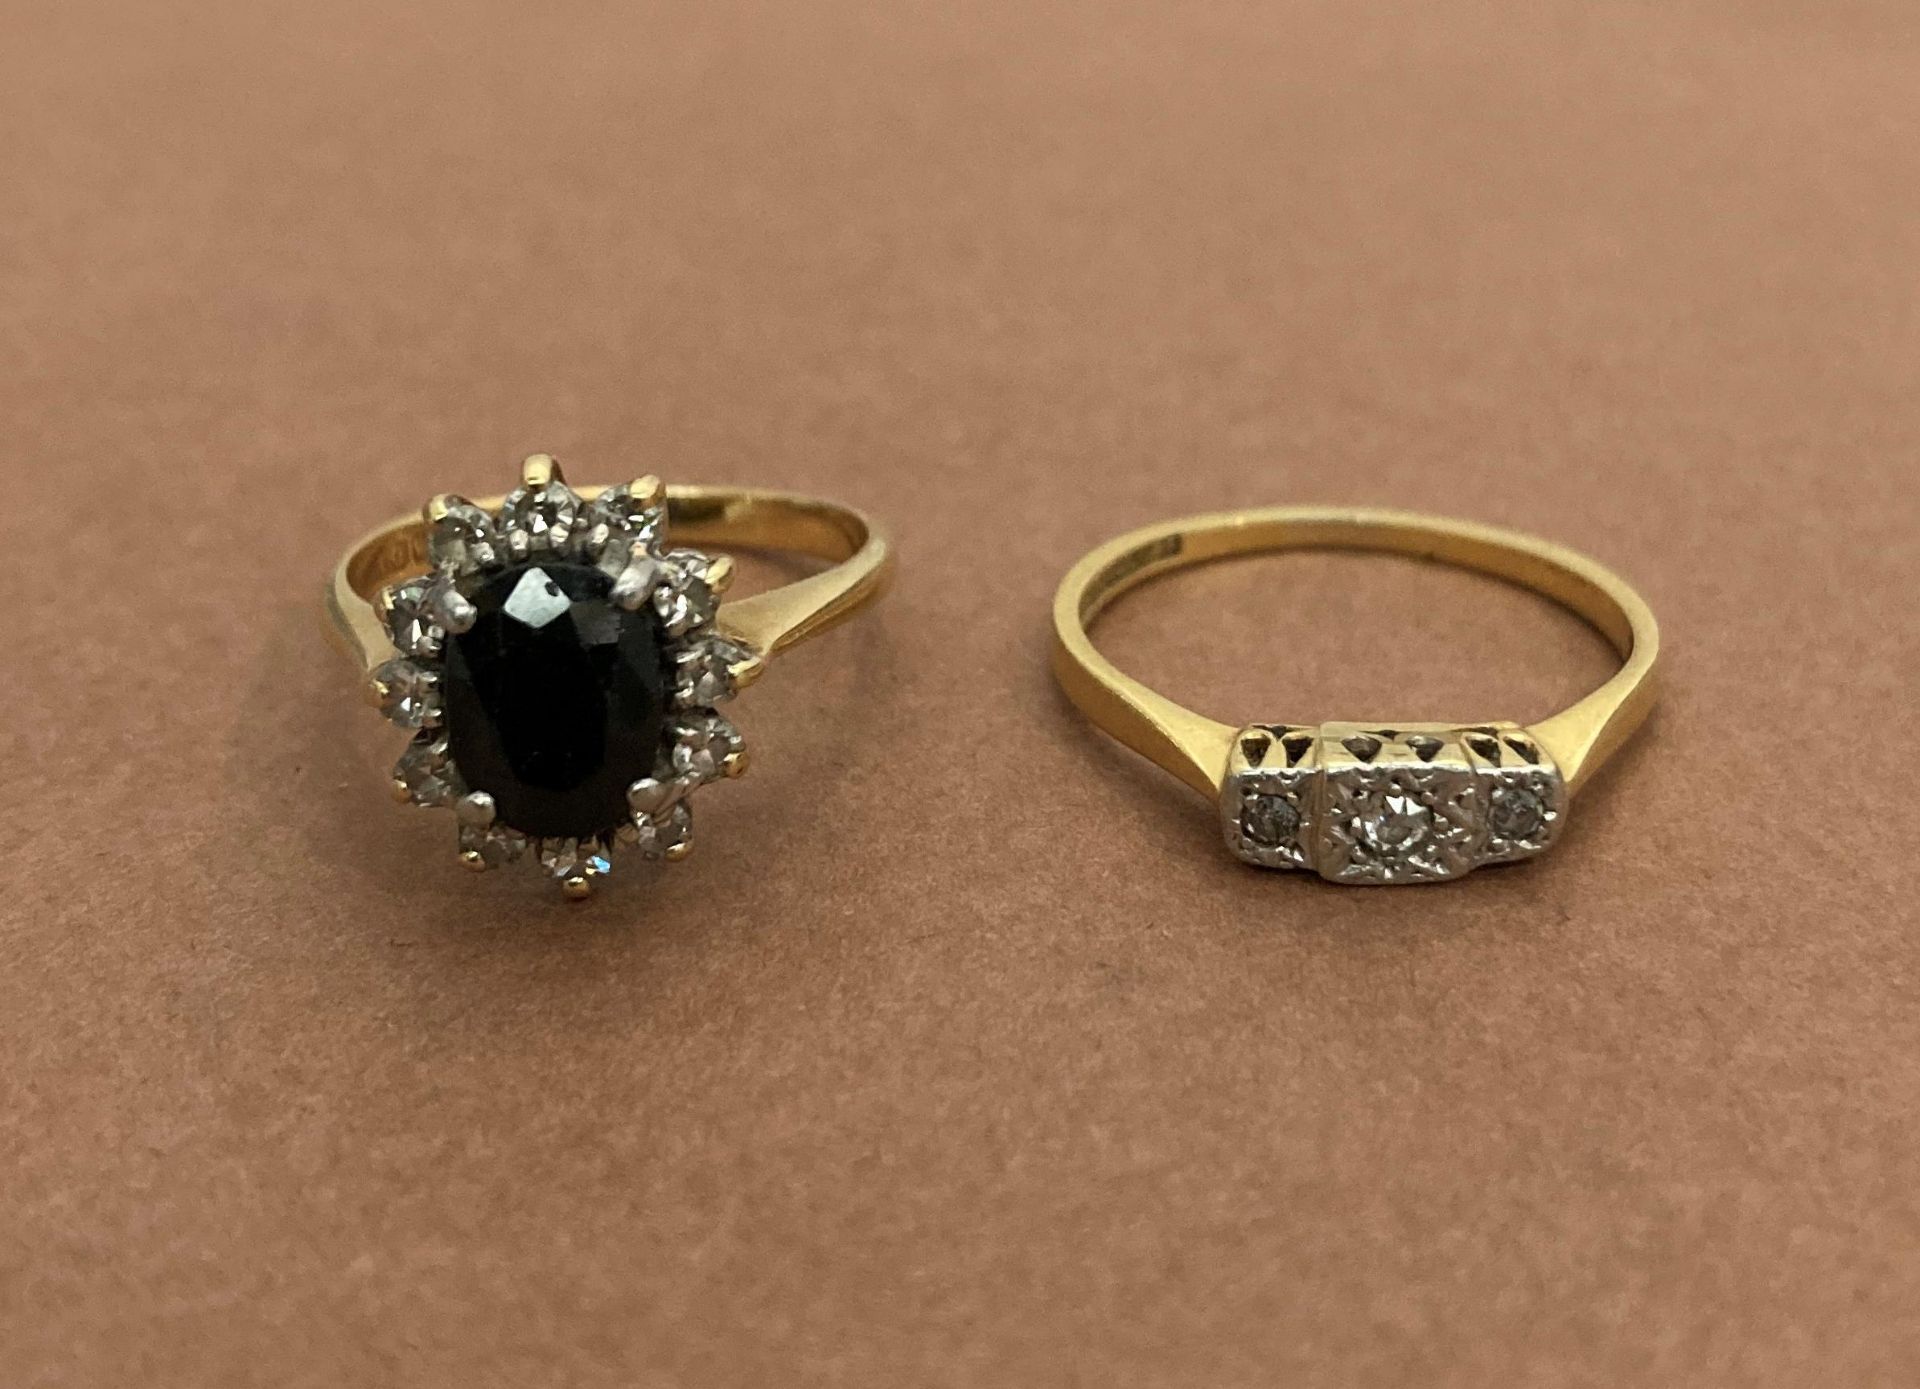 Two 18ct gold rings - an 18ct gold sapphire and diamond ring (size L/M, weight 3.